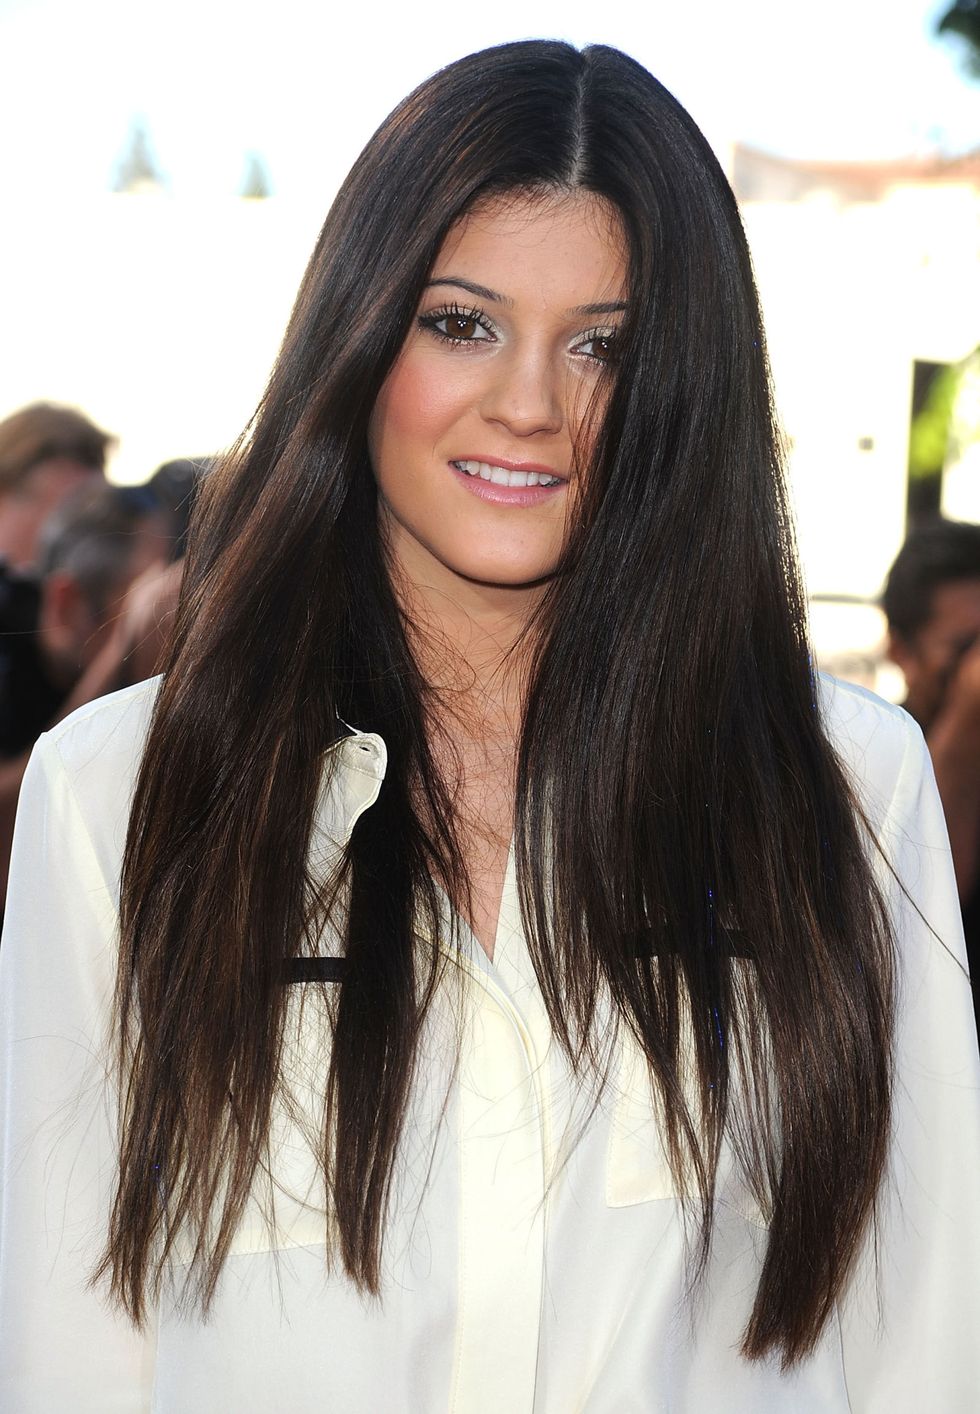 Kylie Jenner in augustus 2011